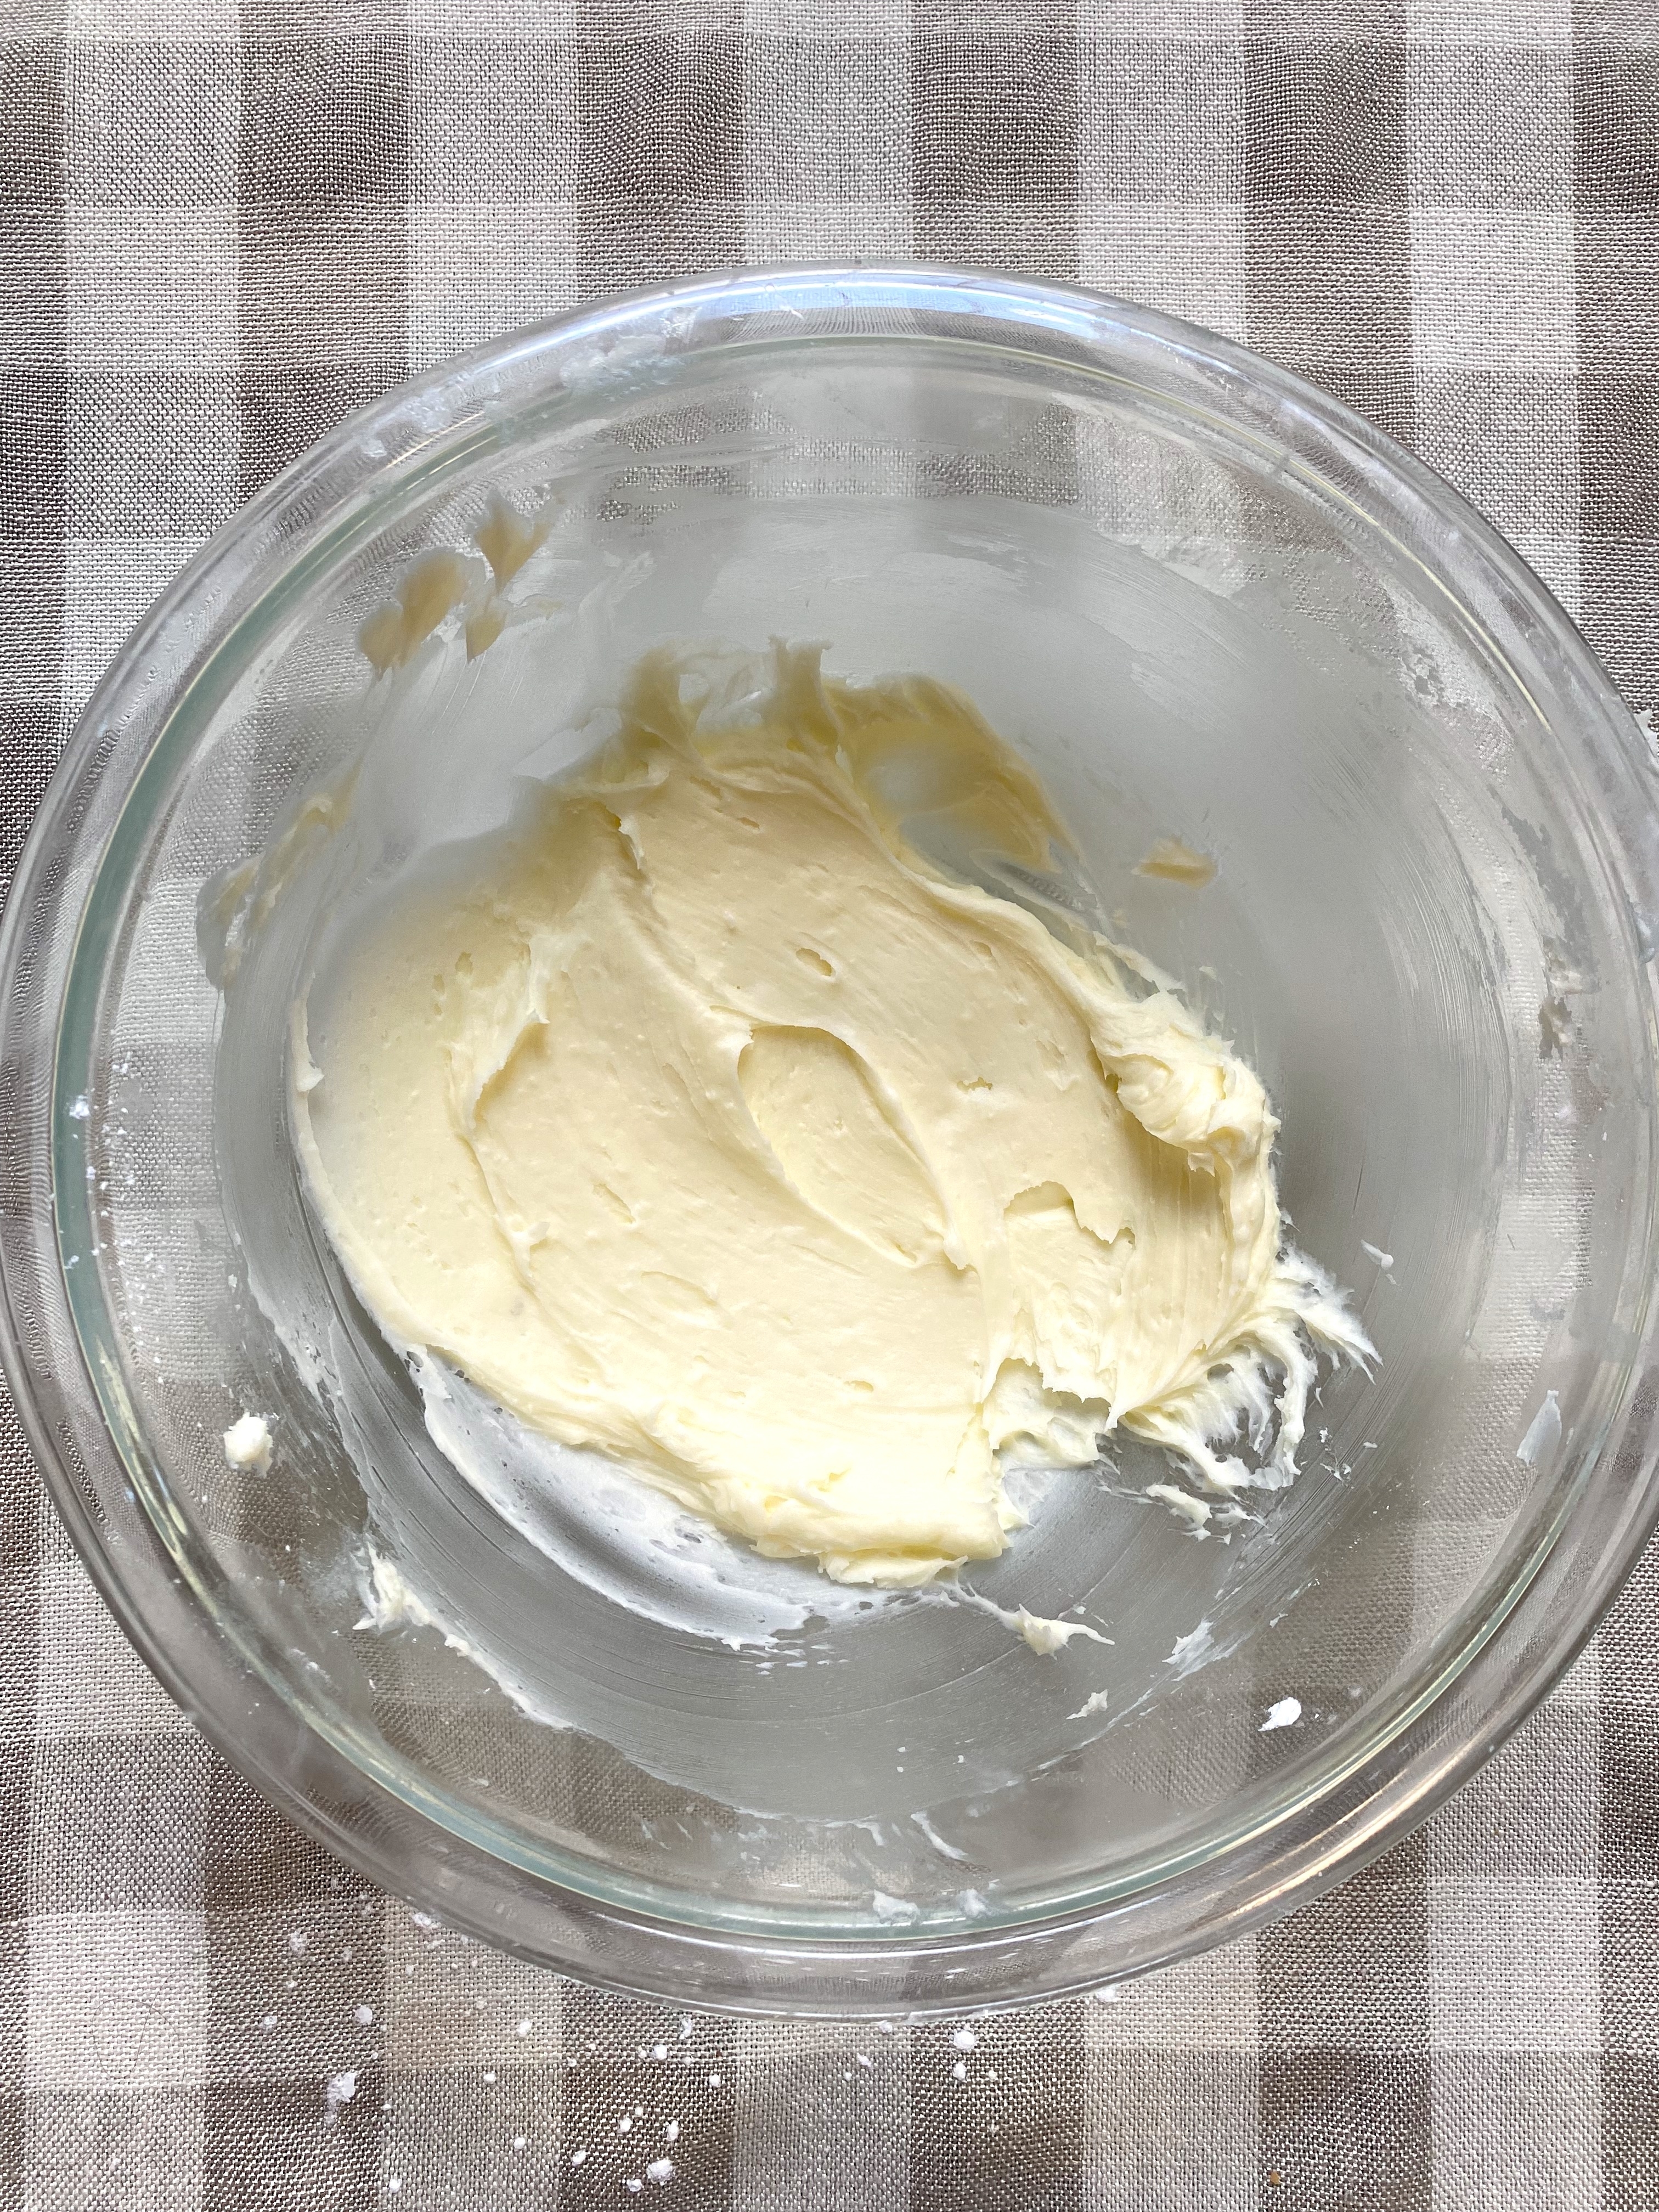 A smooth mixture of butter and sugar in a bowl